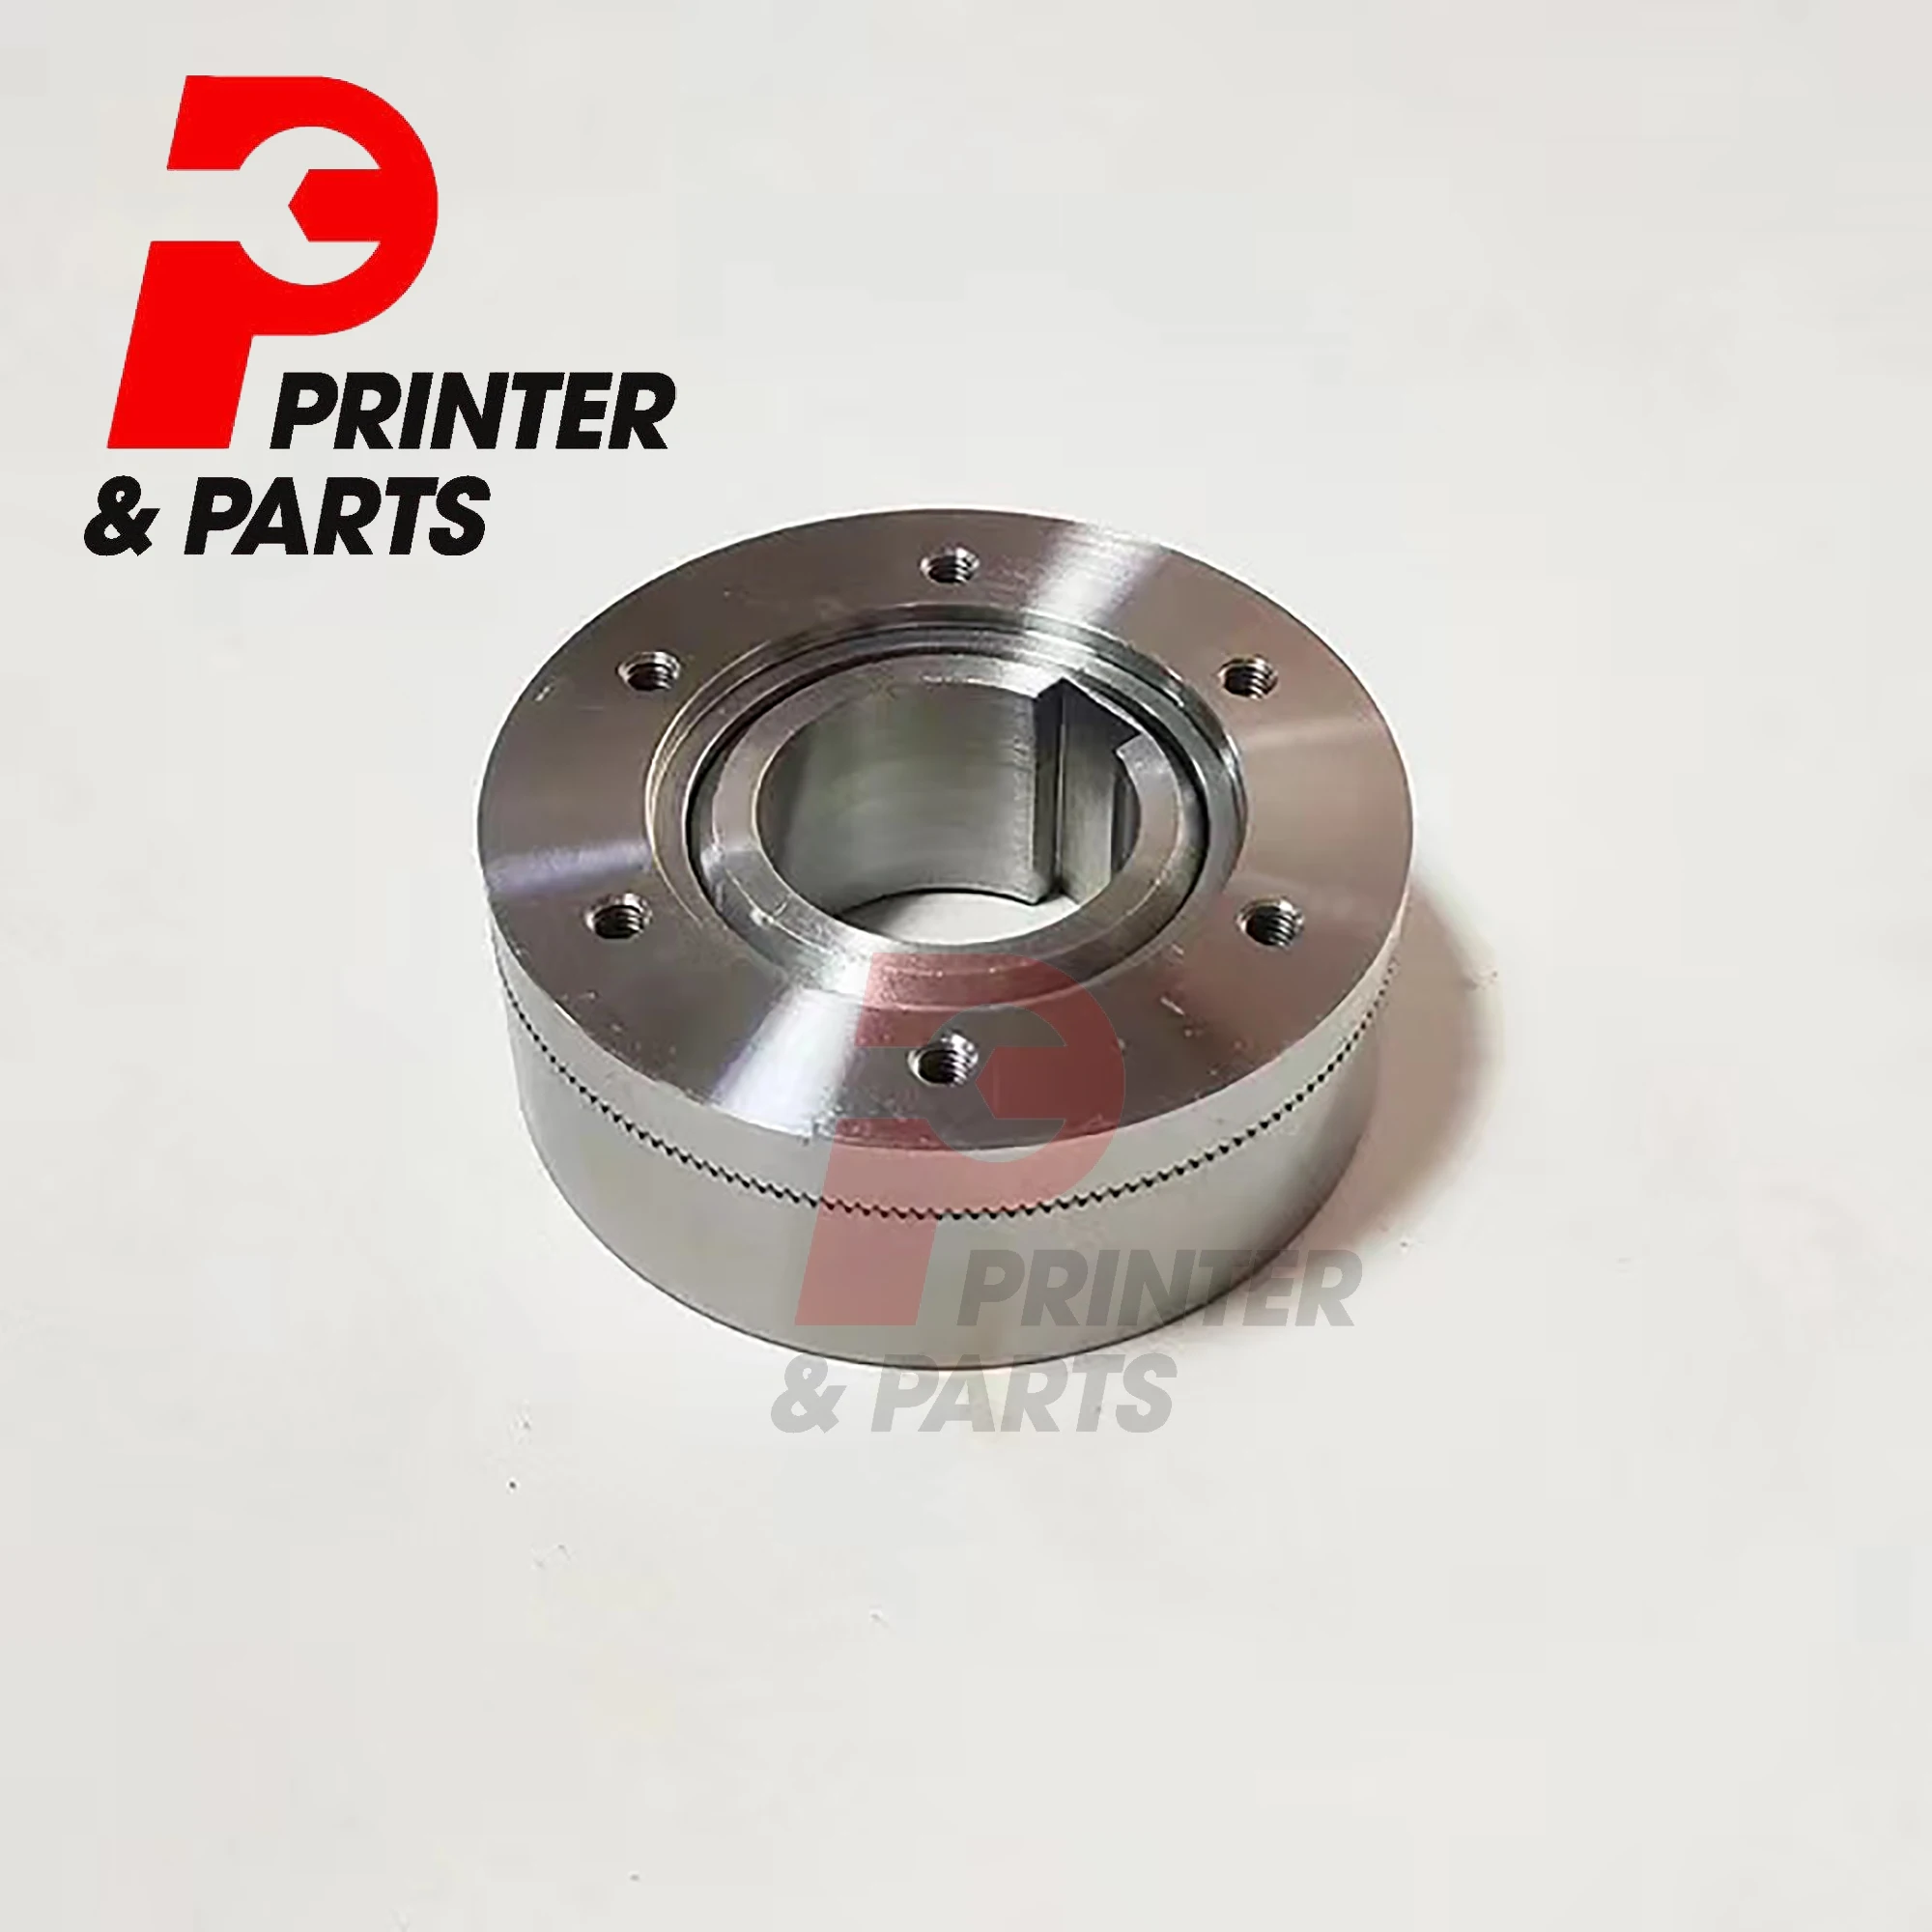 

97x40x35mm KBA105 Clutch For Offset Printing Machine Spare Parts